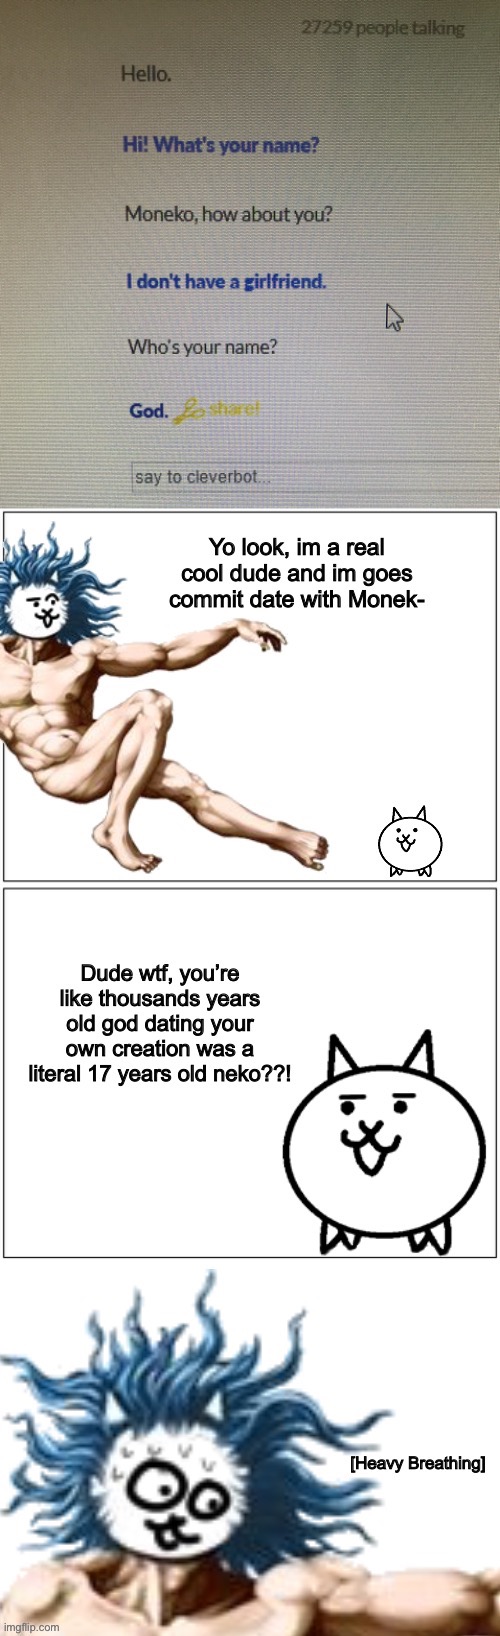 Cat god and the dating site (lol its cleverbot) | image tagged in memes,funny,battle,cats,god,dating | made w/ Imgflip meme maker